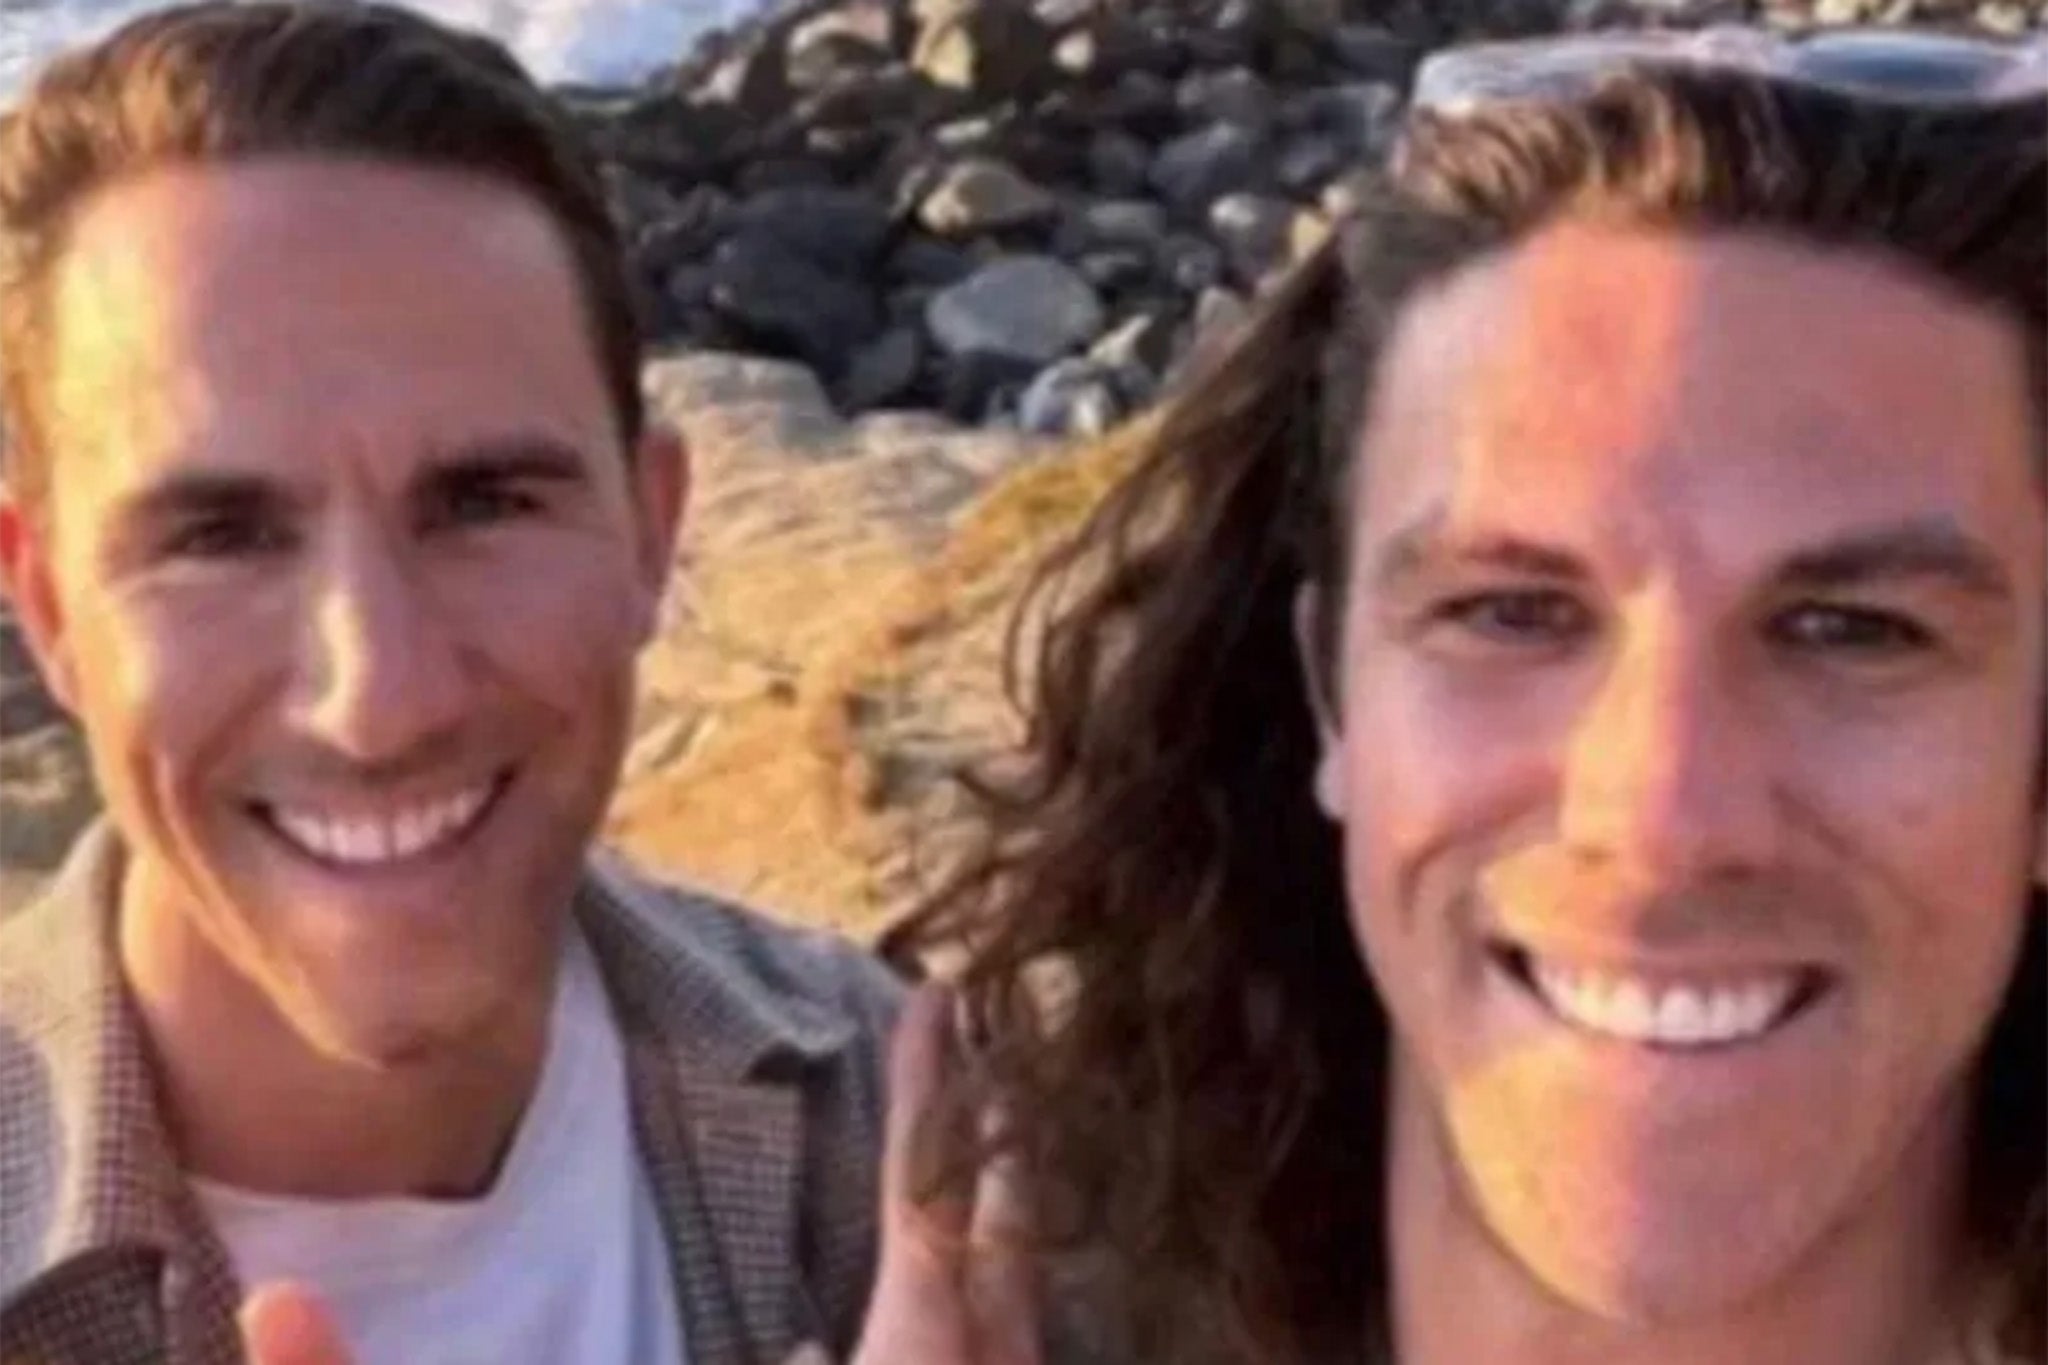 Australians Jake and Callum Robinson went missing while on a trip in Baja California, Mexico, last weekend